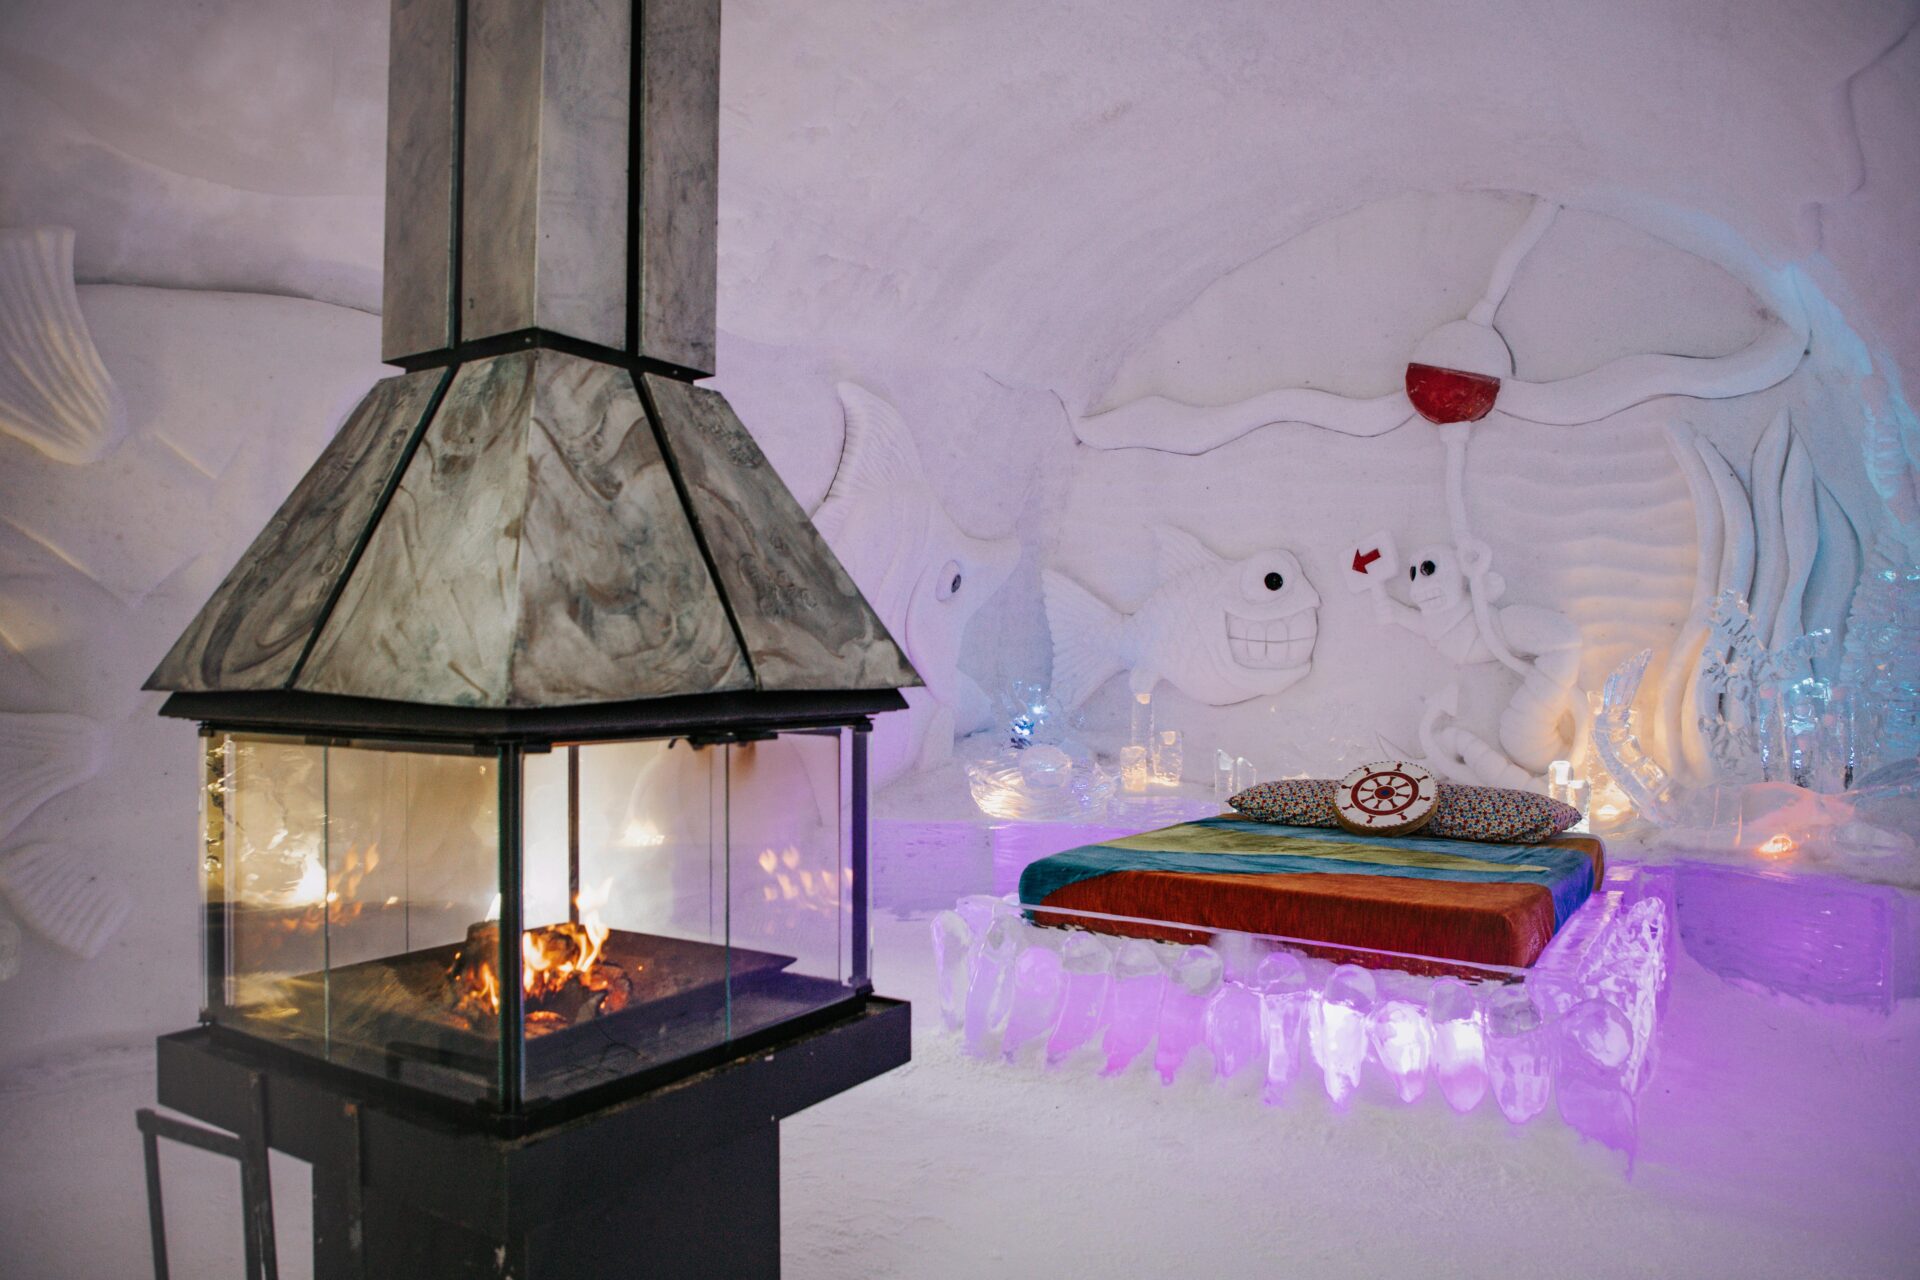 inside the premium suite at Hôtel de Glace, a king size bed and fireplace is in the room